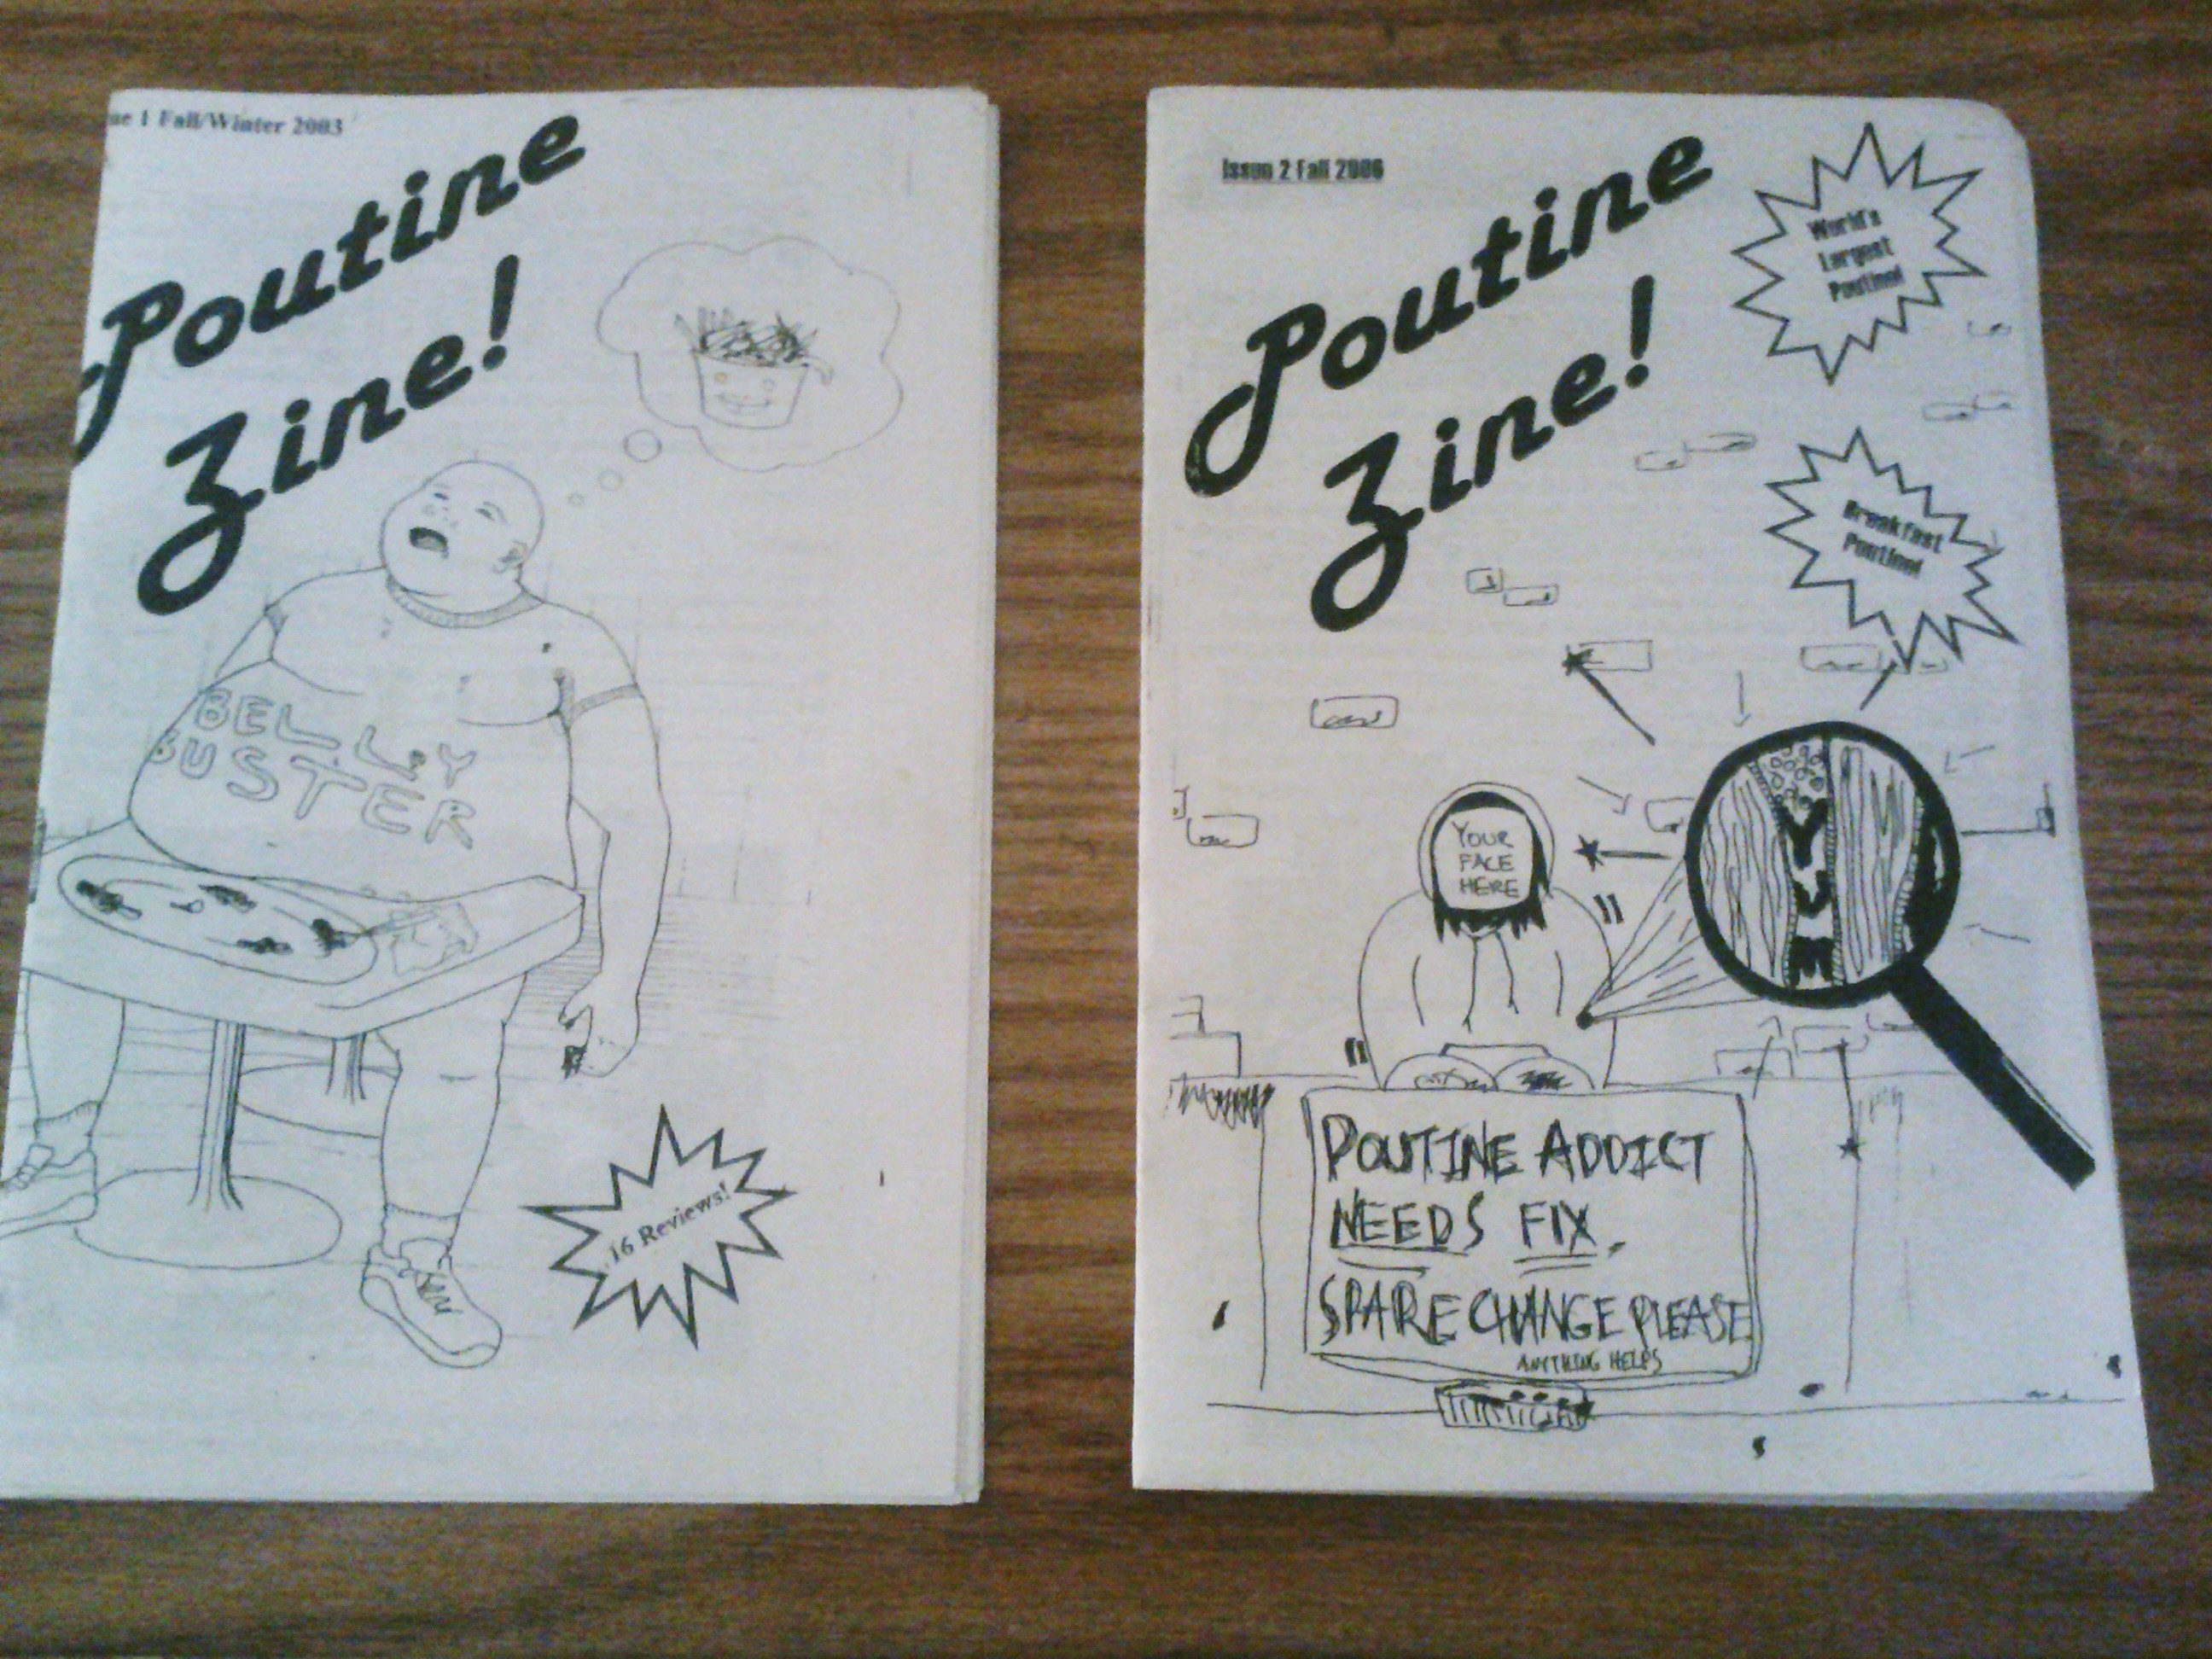 photo of Poutine zine, issues 1 & 2